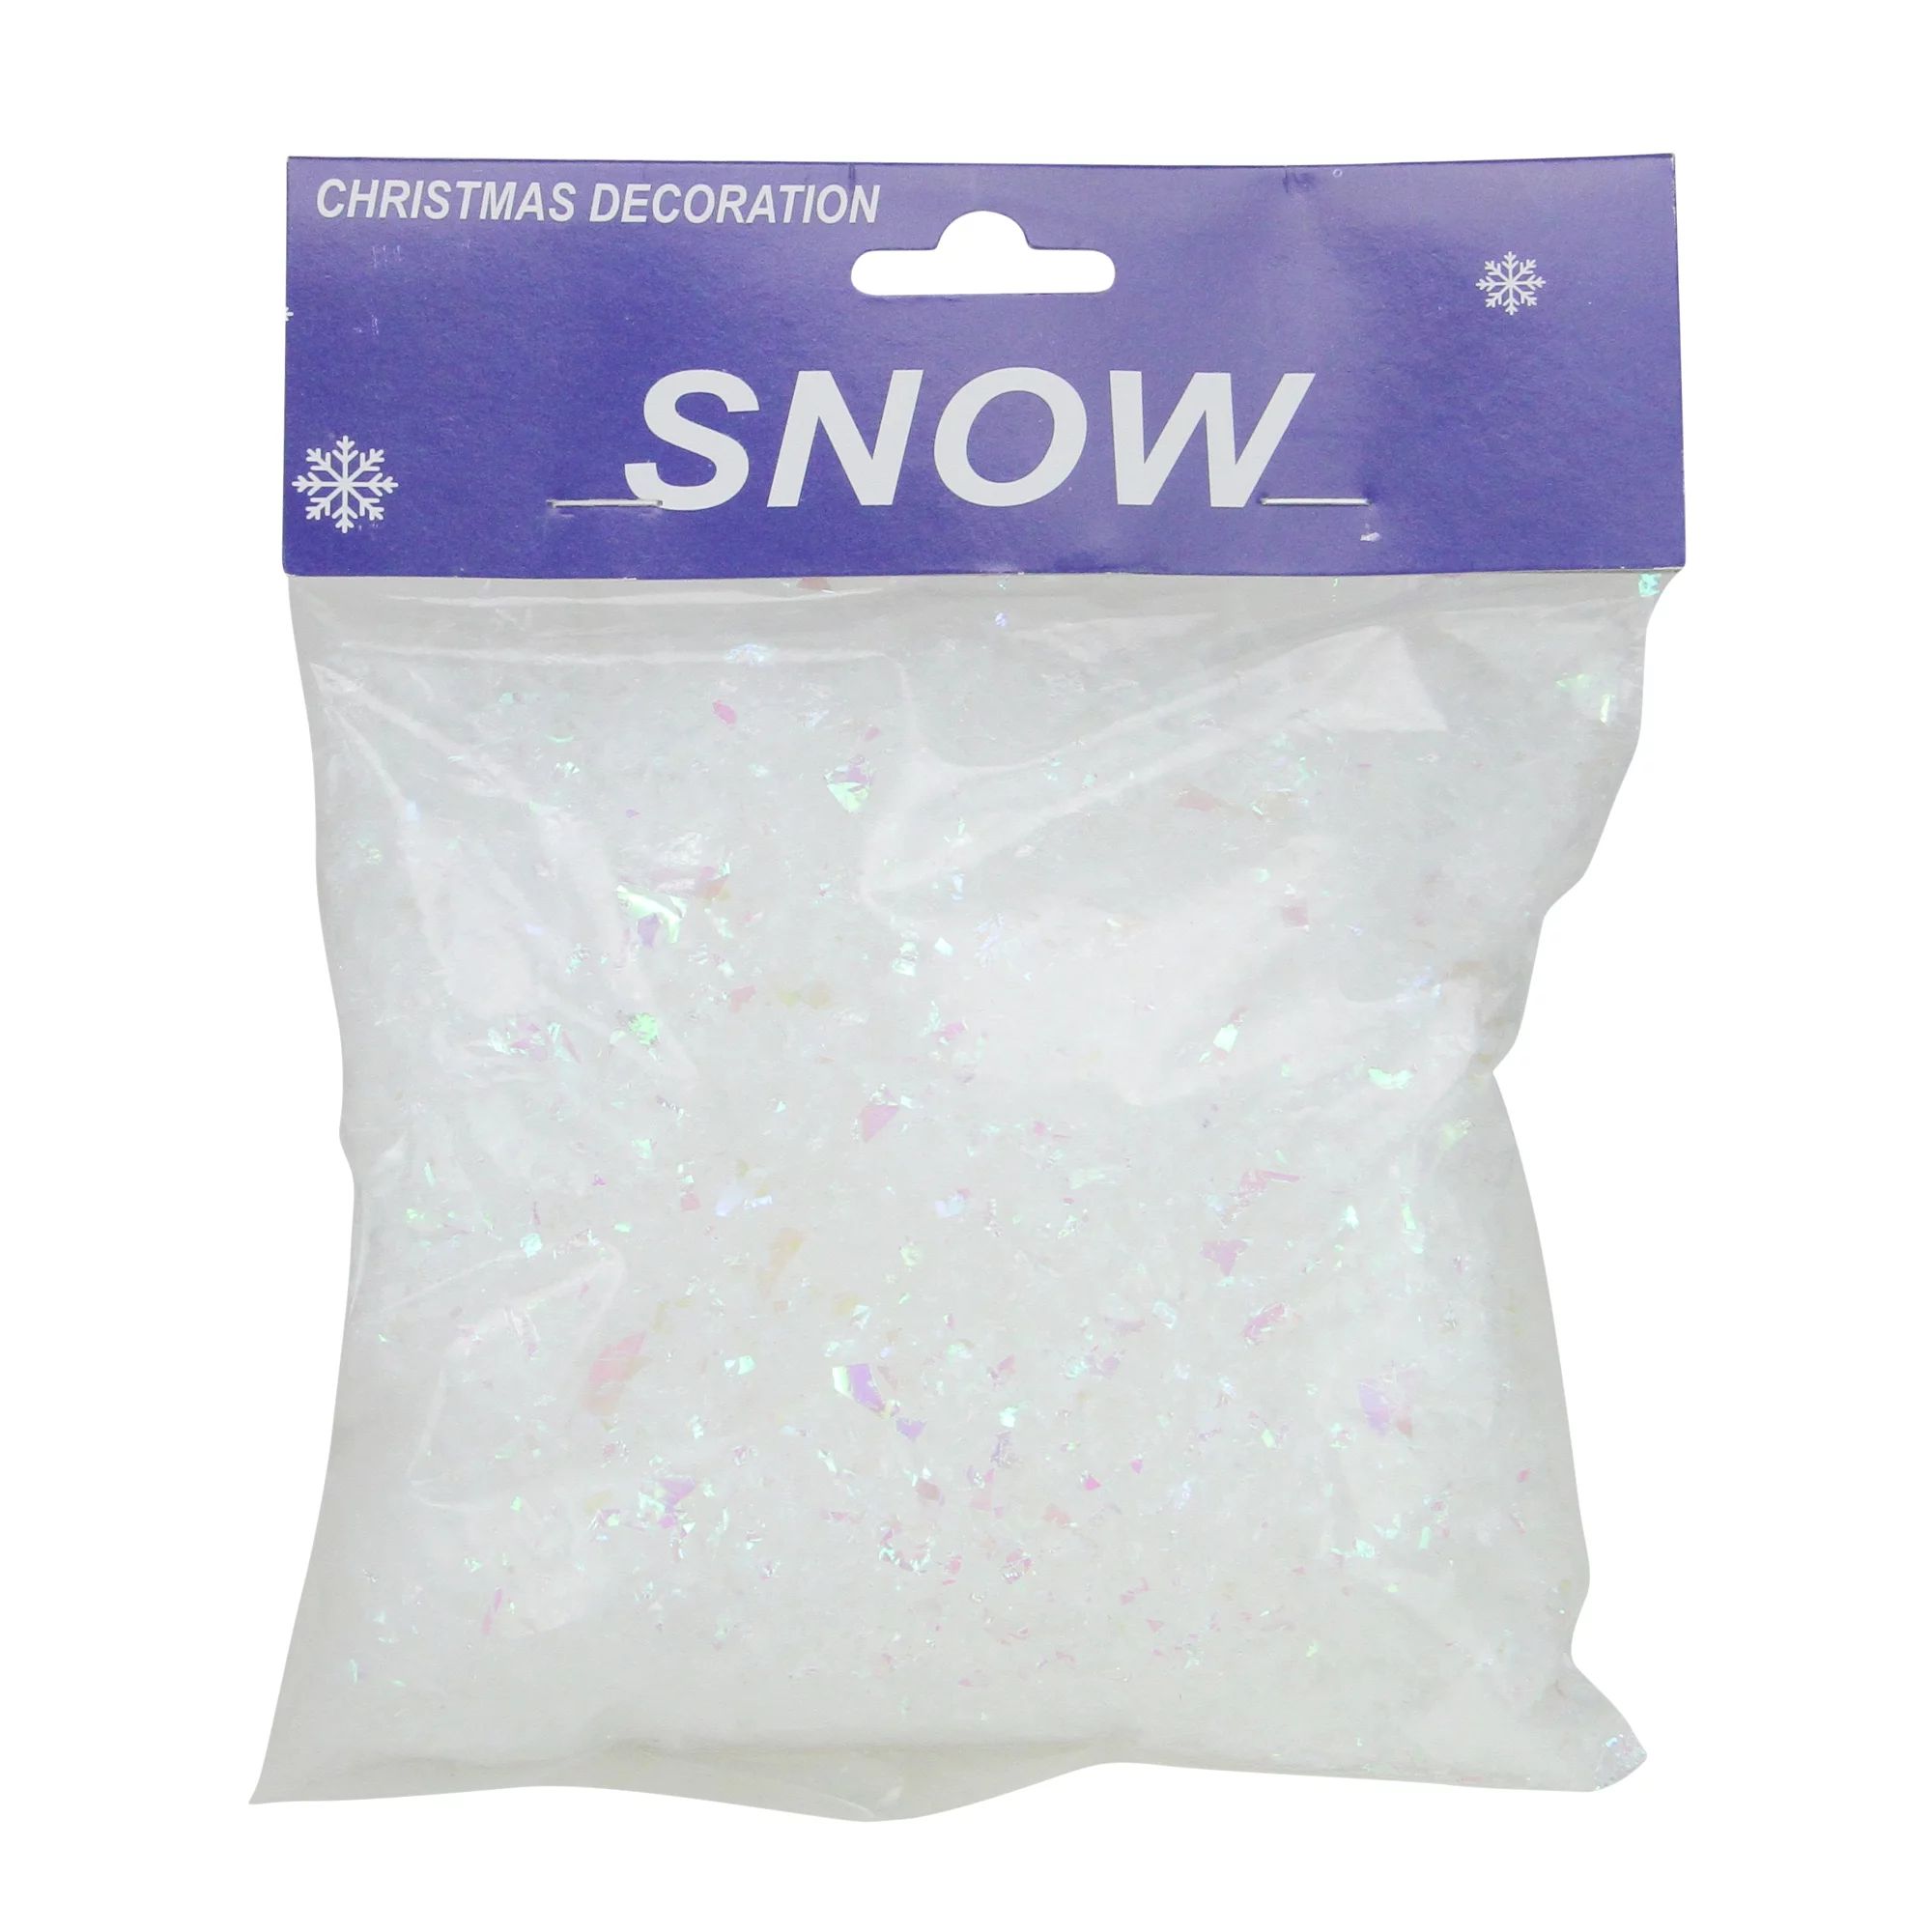 White Iridescent Artificial Powder Snow Flakes for Christmas Decorating 1.75qts | Walmart (US)